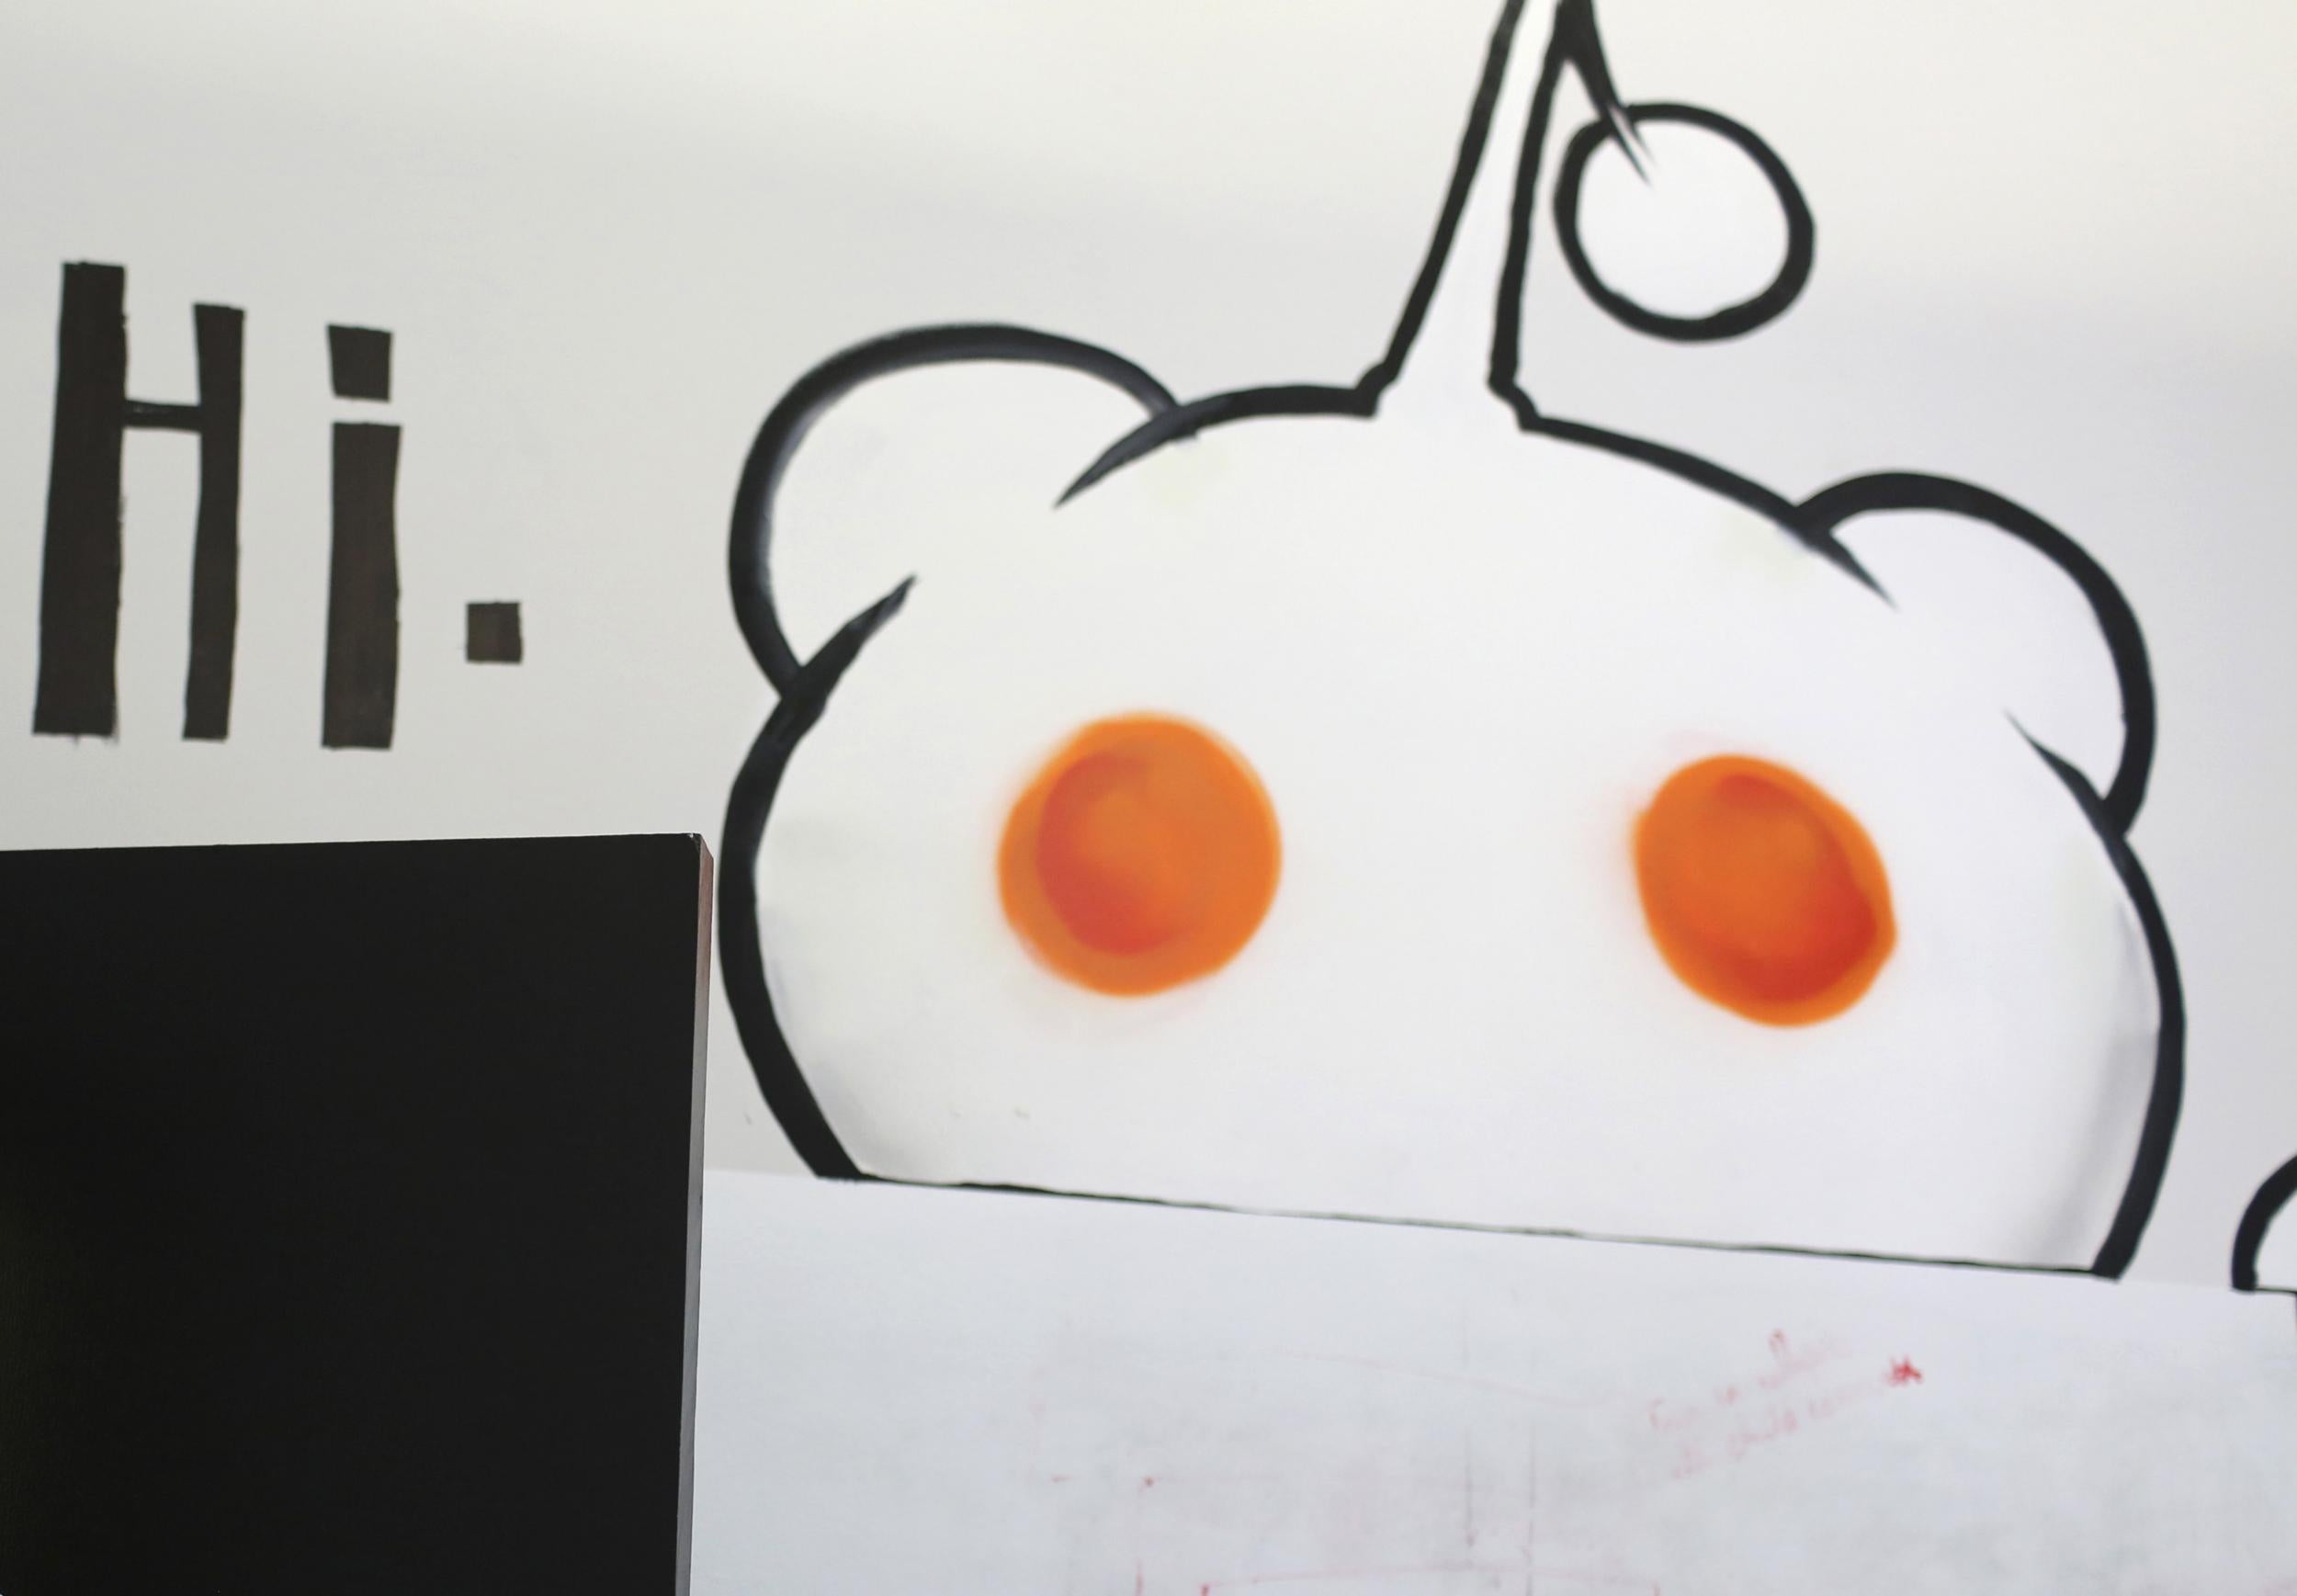 Reddit bans Donald Trump fan page and thousands of other communities in move against hate speech 